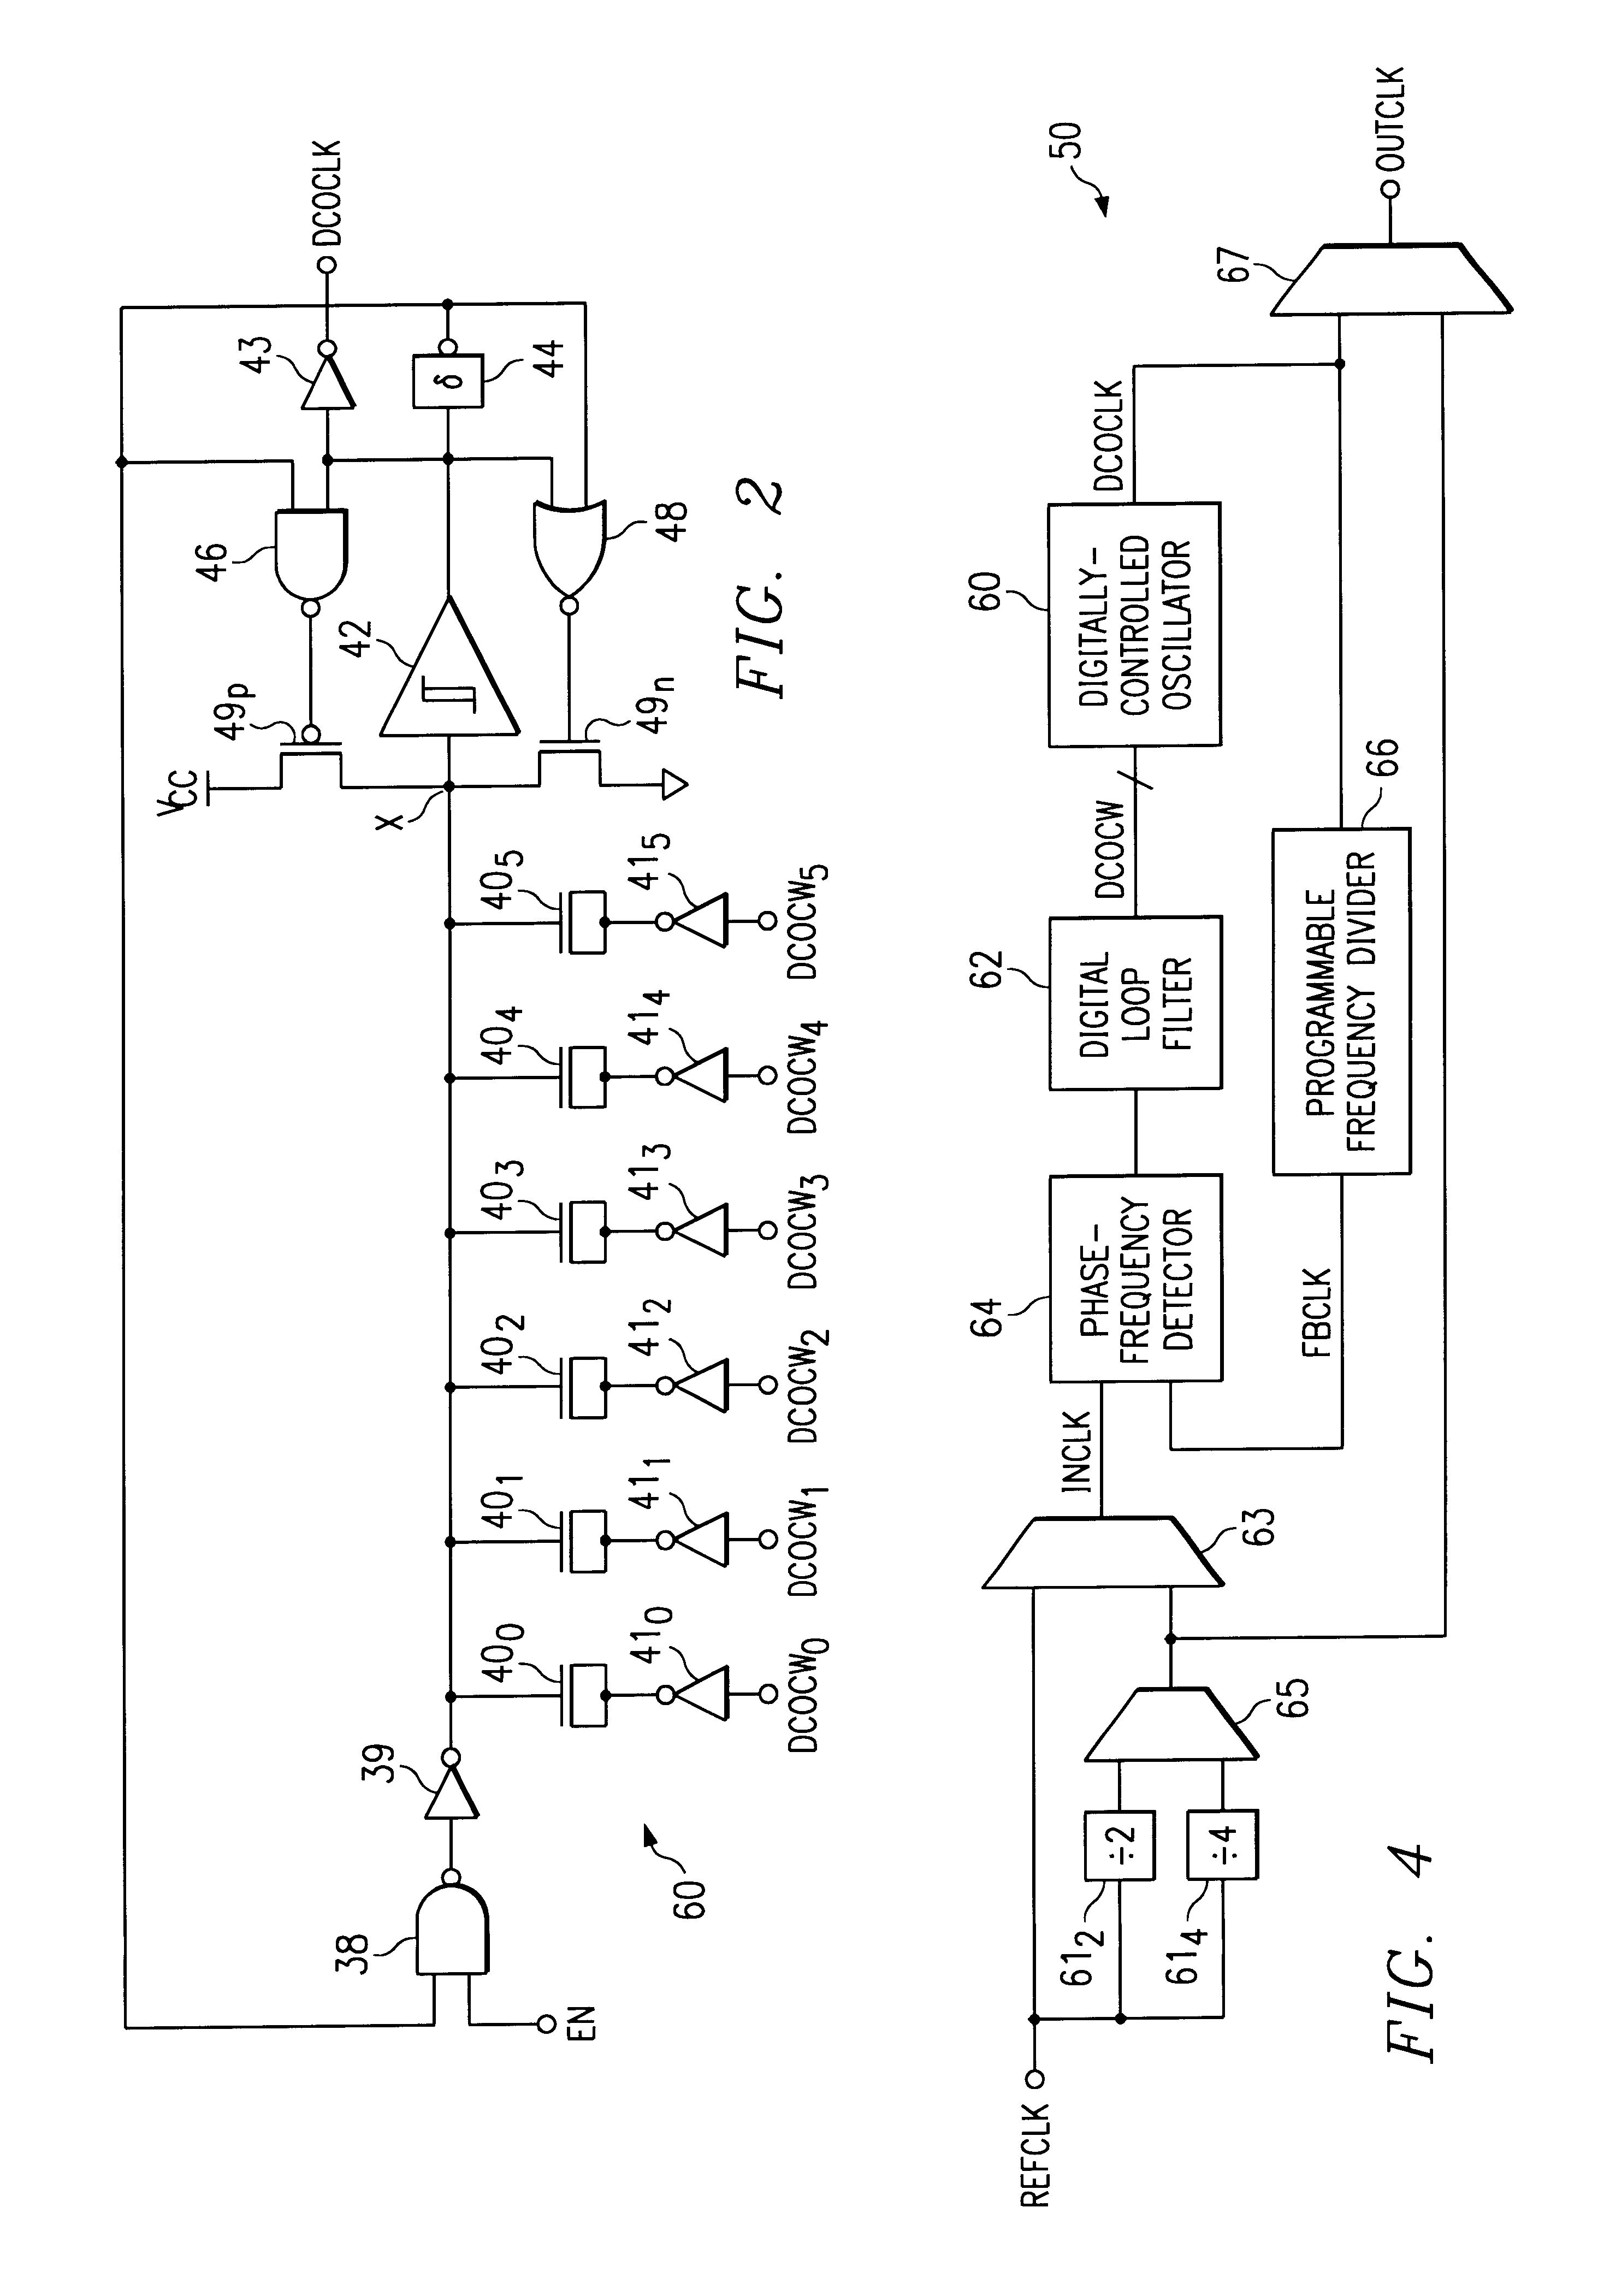 Digitally-controlled oscillator with switched-capacitor frequency selection